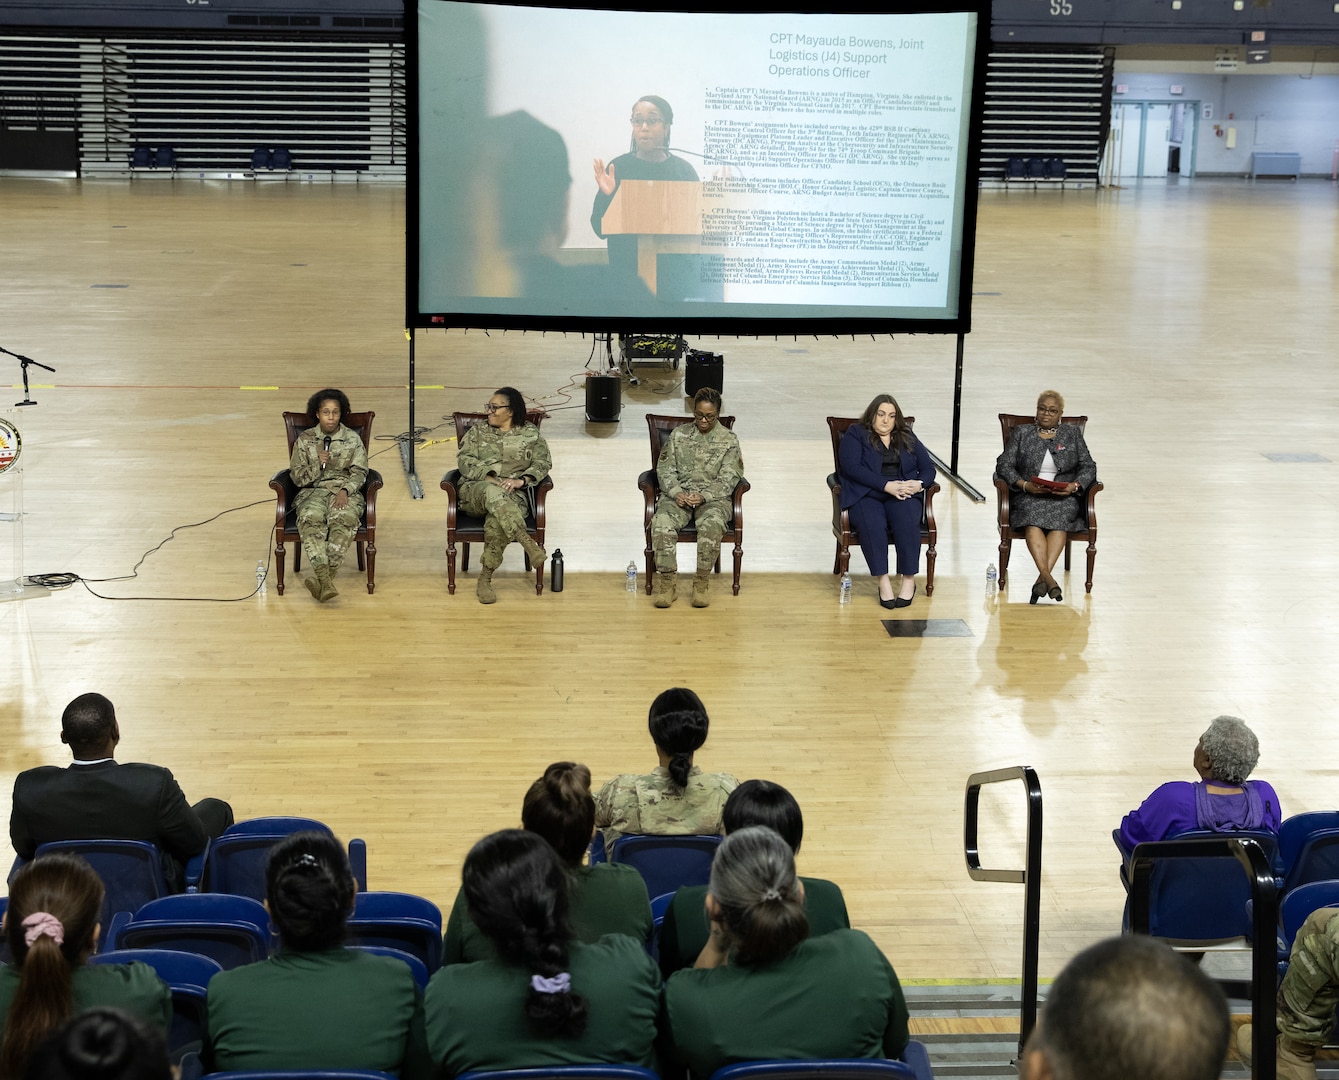 District of Columbia National Guard holds Women Empowerment Panel to commemorate Women’s History Month in the D.C. National Guard Armory, March 28, 2024. The panel features Chief Master Sgt. Naconda Hinton, Senior Enlisted Leader, 113th Medical Group; Capt. Mayauda Bowens, Logistics Support Operations Officer; Chief Warrant Officer 3 Annette Johnson-Tate, DCARNG Officer Strength Manager; Vakisa Bragg, Program Analyst and Ms. Nicole McDermott, Chief of Staff (DCGO-DCNG).